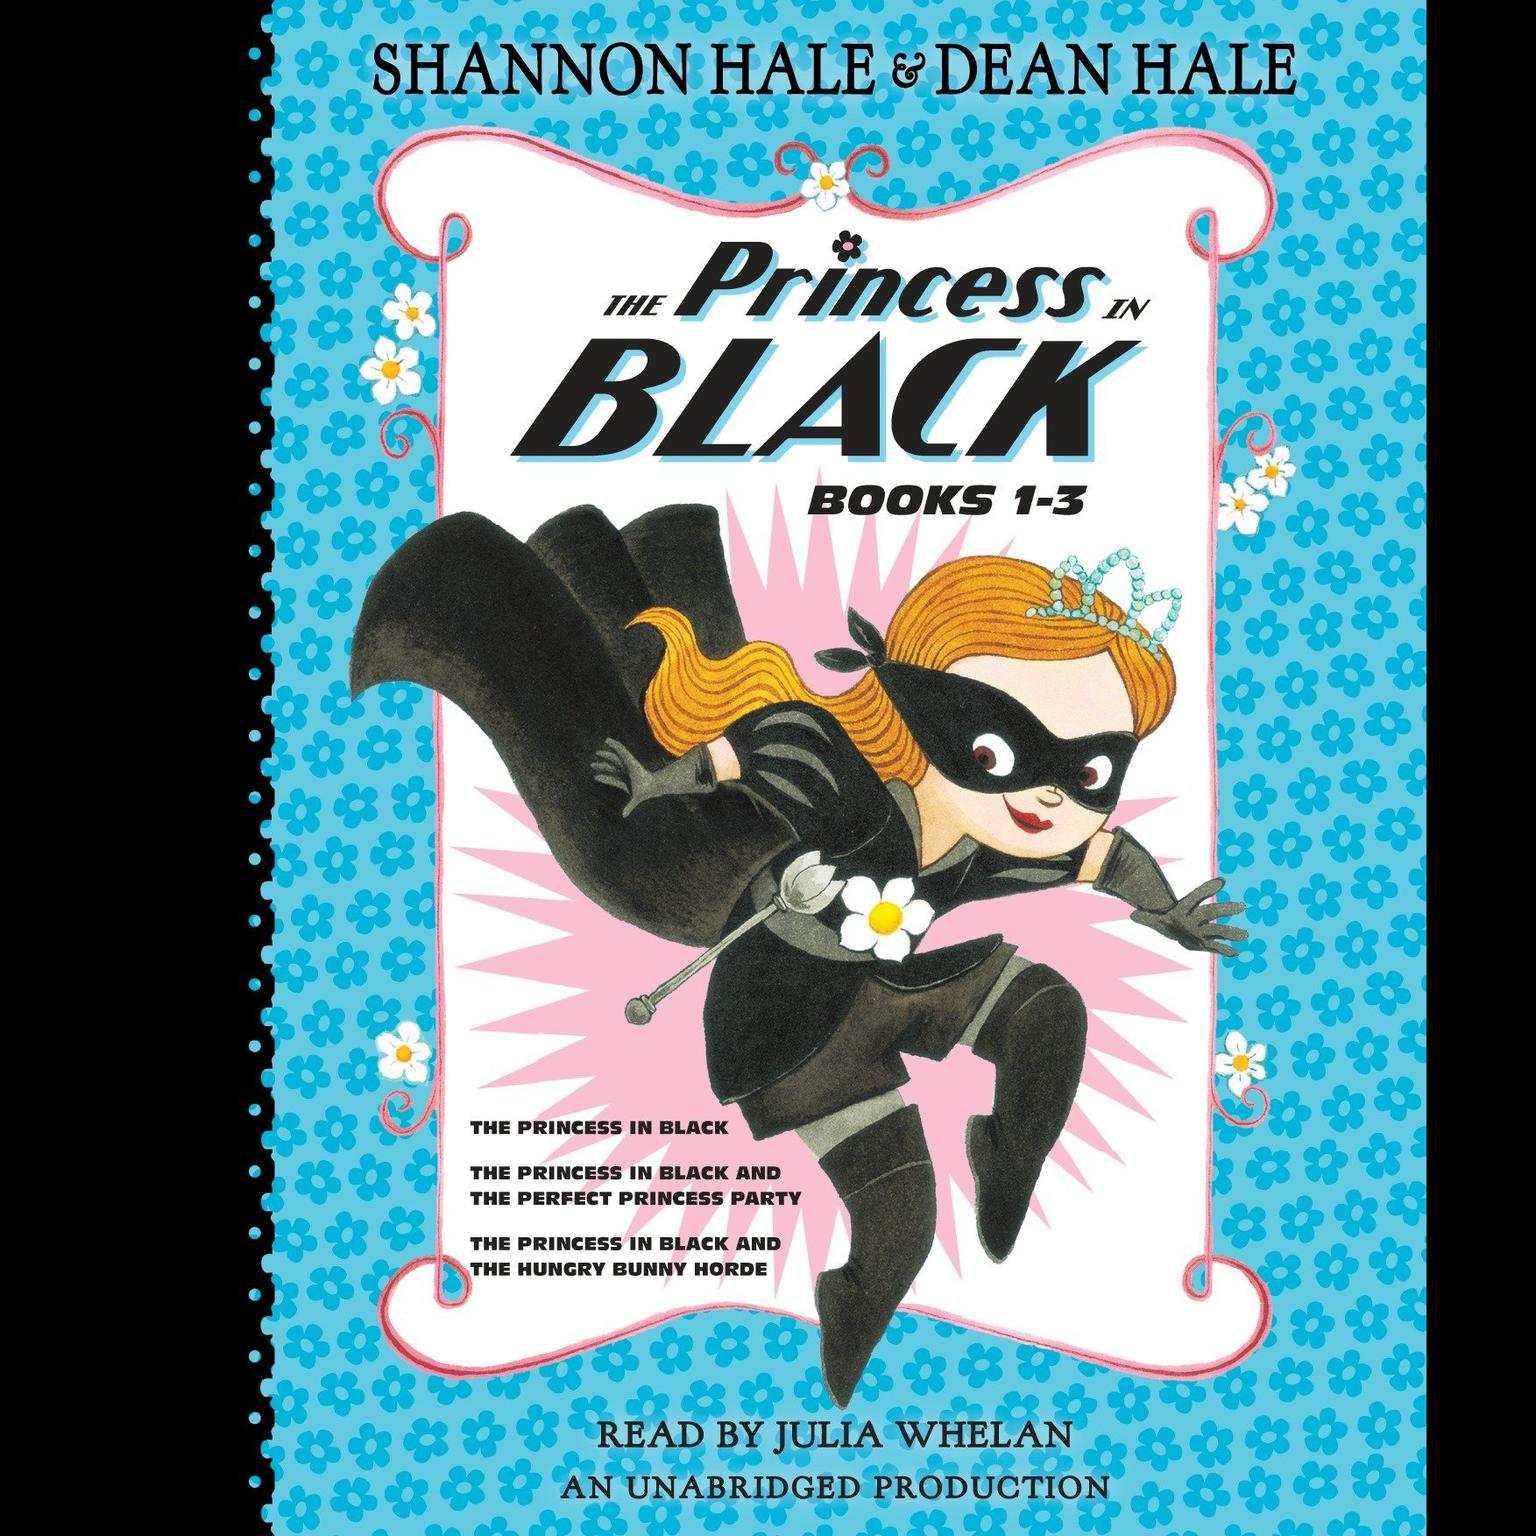 The Princess in Black, Books 1-3: The Princess in Black; The Princess in Black and the Perfect Princess Party; The Princess in Black and the Hungry Bunny Horde Audiobook, by Shannon Hale